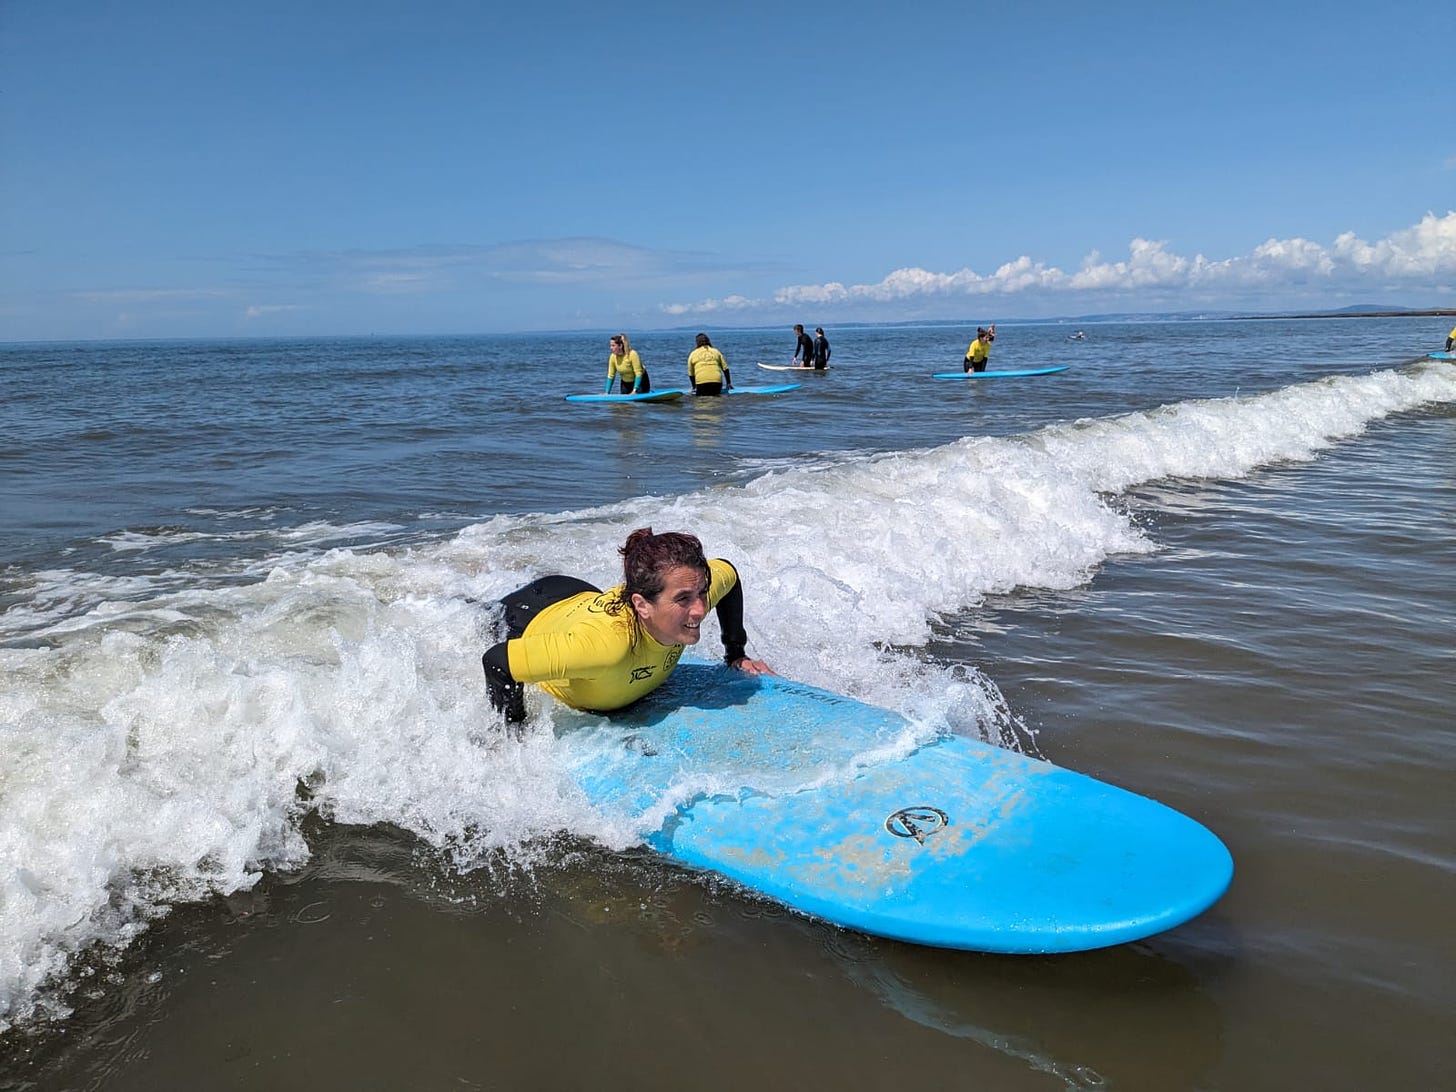 A woman in a black wetsuit and yellow safety top is lying on a surfboard, enjoying the wave beneath her. Her face is a picture of delighted concentration as she flows with the water